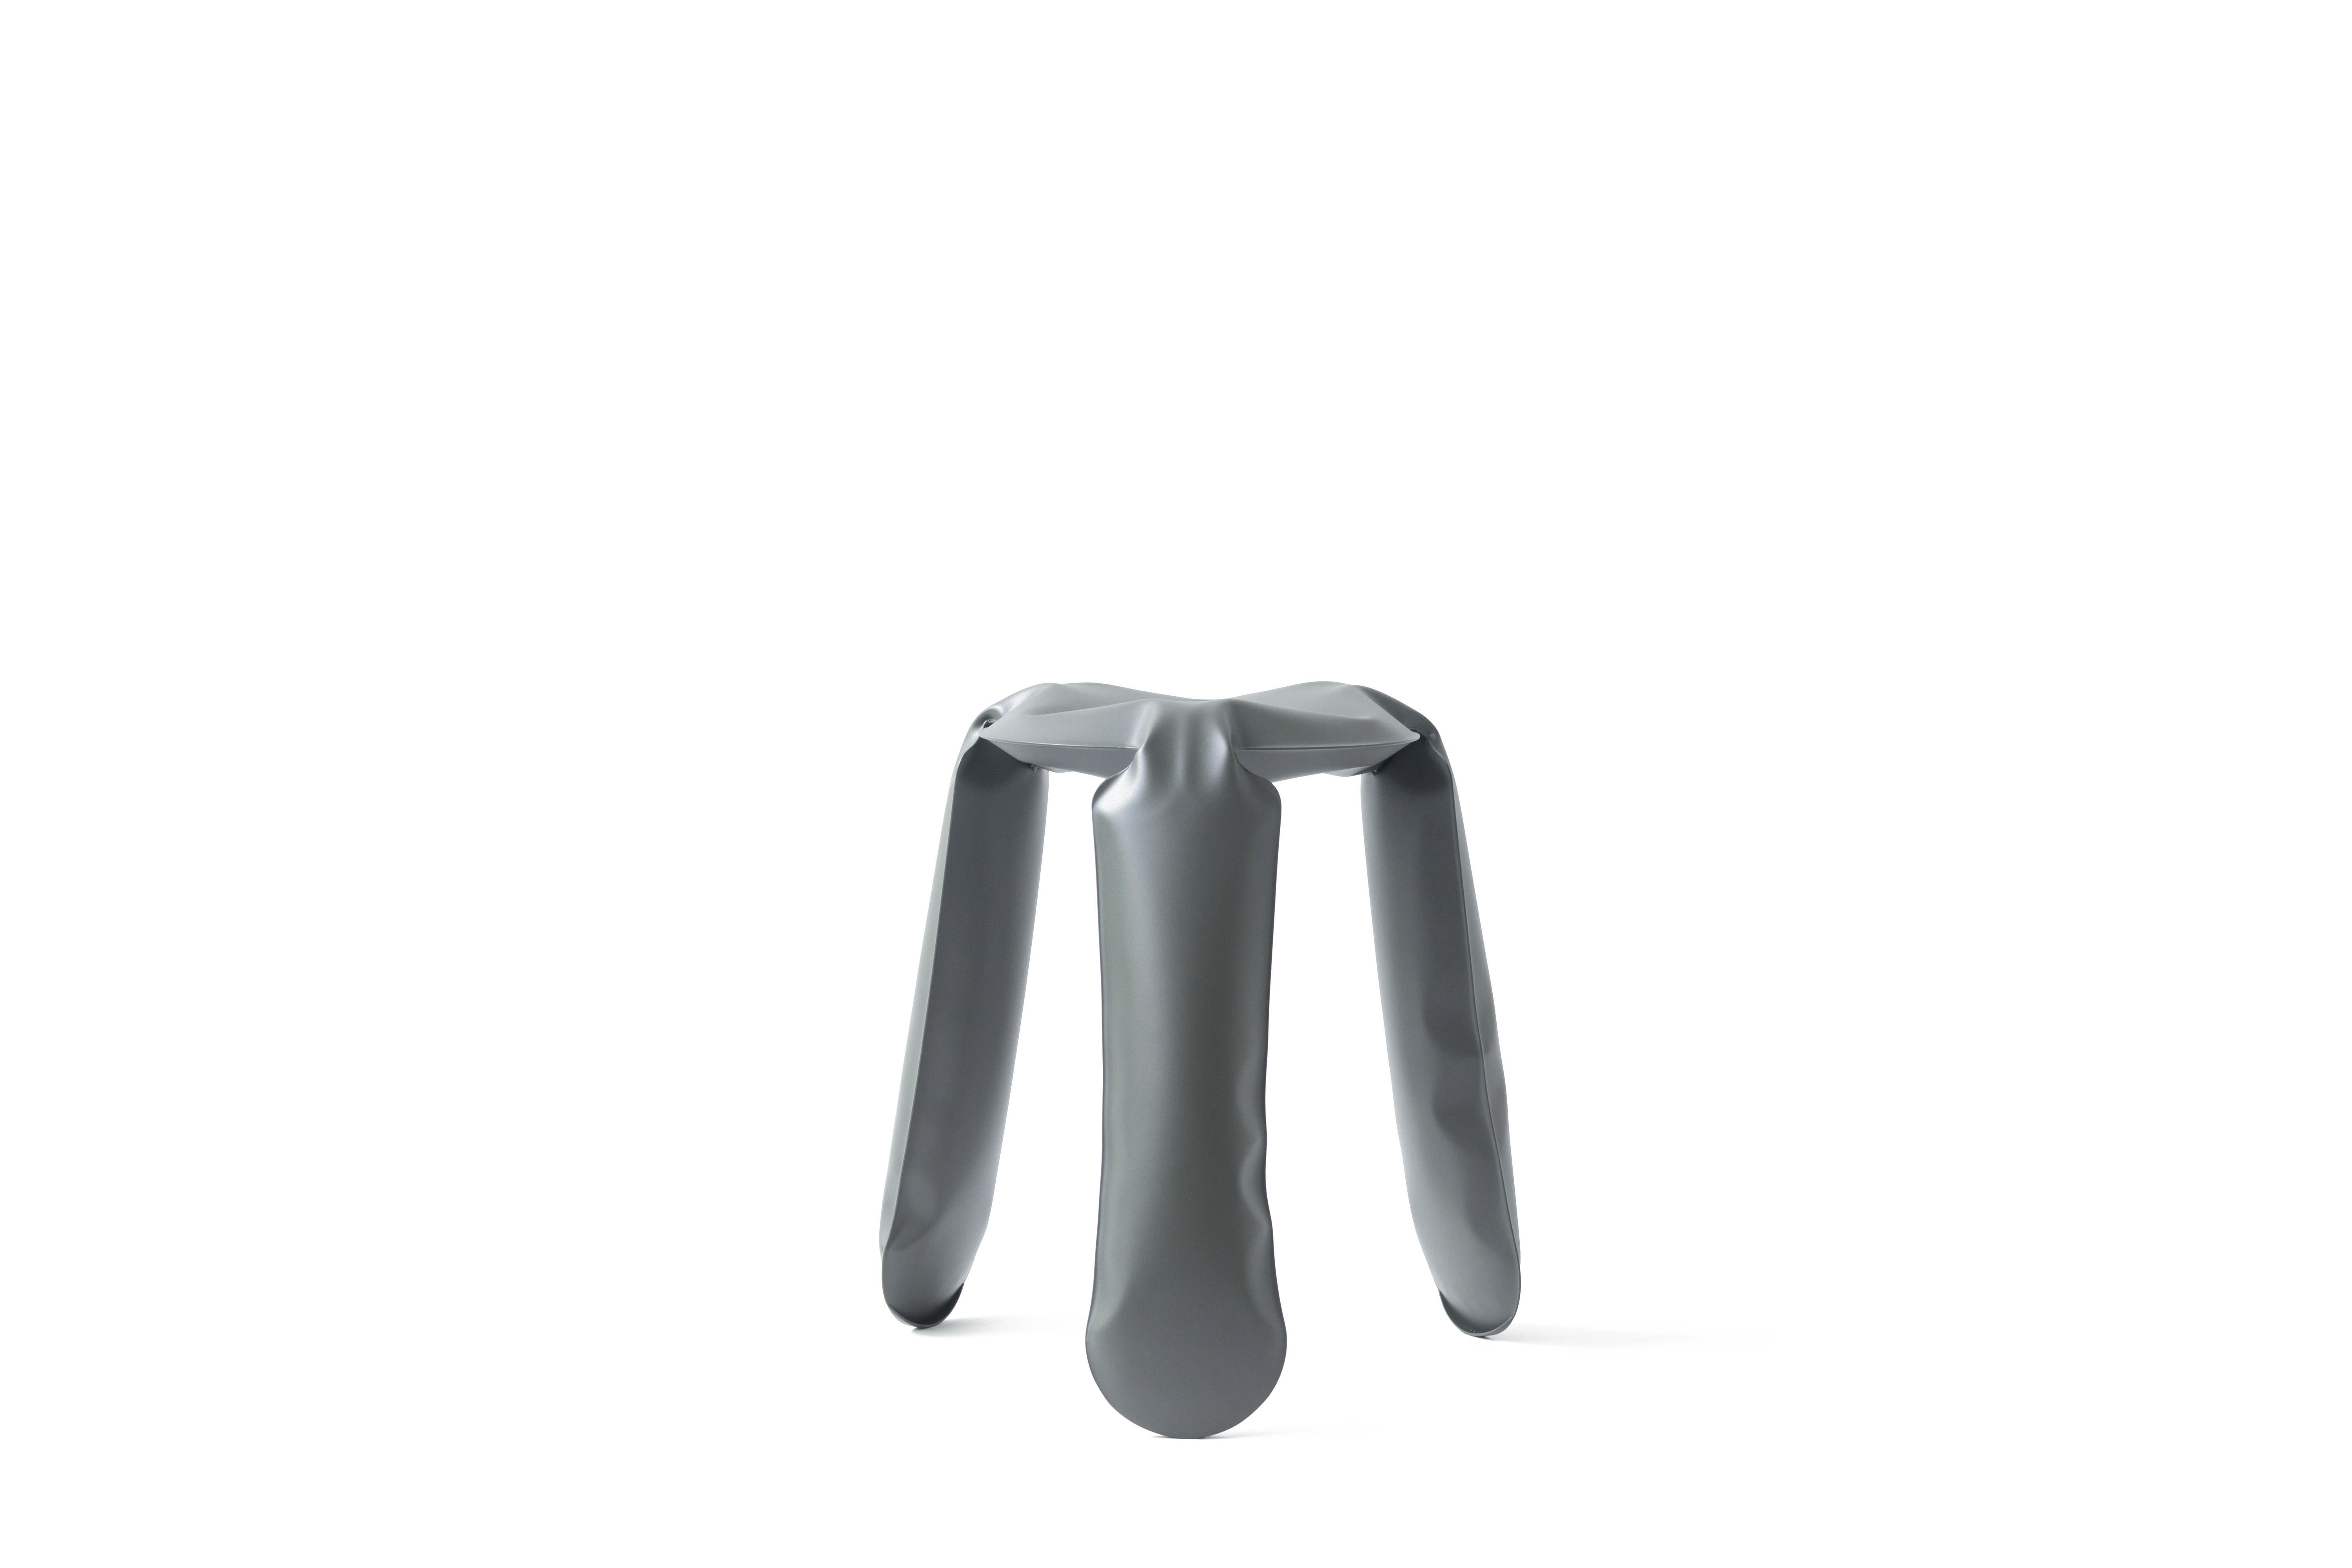 Umbra Gray Steel Standard Plopp Stool by Zieta
Dimensions: D 35 x H 50 cm 
Material: Carbon steel. 
Finish: Powder-coated.
Available in colors: Graphite, Moss Grey, Umbra Grey, Beige Grey, Blue Grey. Available in Stainless Steel, Aluminum, and